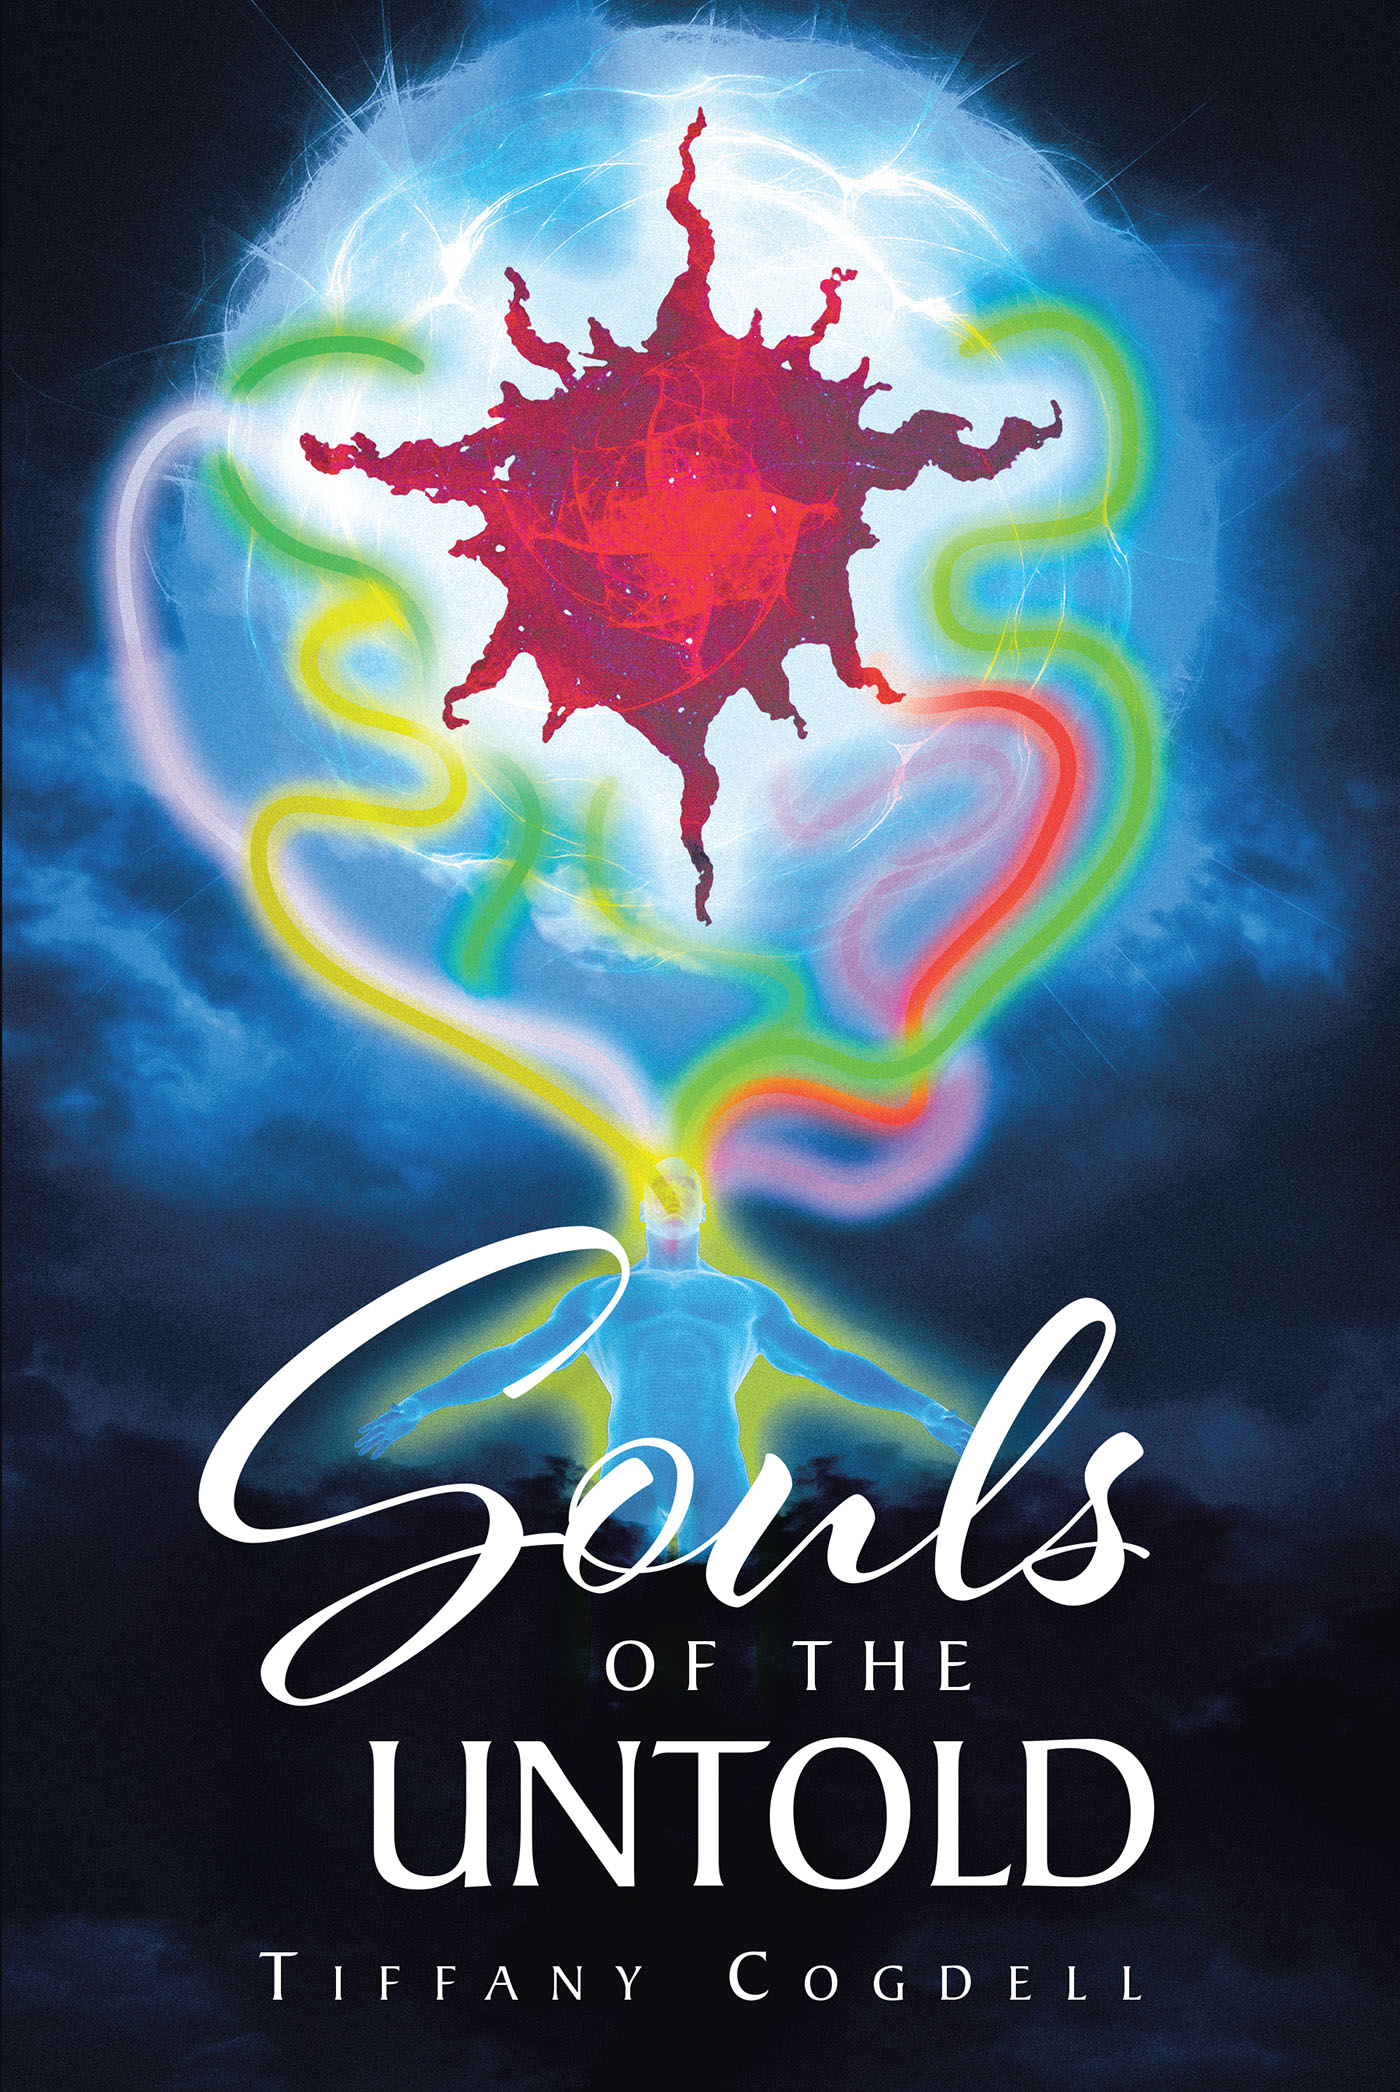 Author Tiffany Cogdell’s New Book, "Souls of the Untold," is a Thought-Provoking Series of Poems That Discuss the Topics That Bind All Humans Together in Their Existence